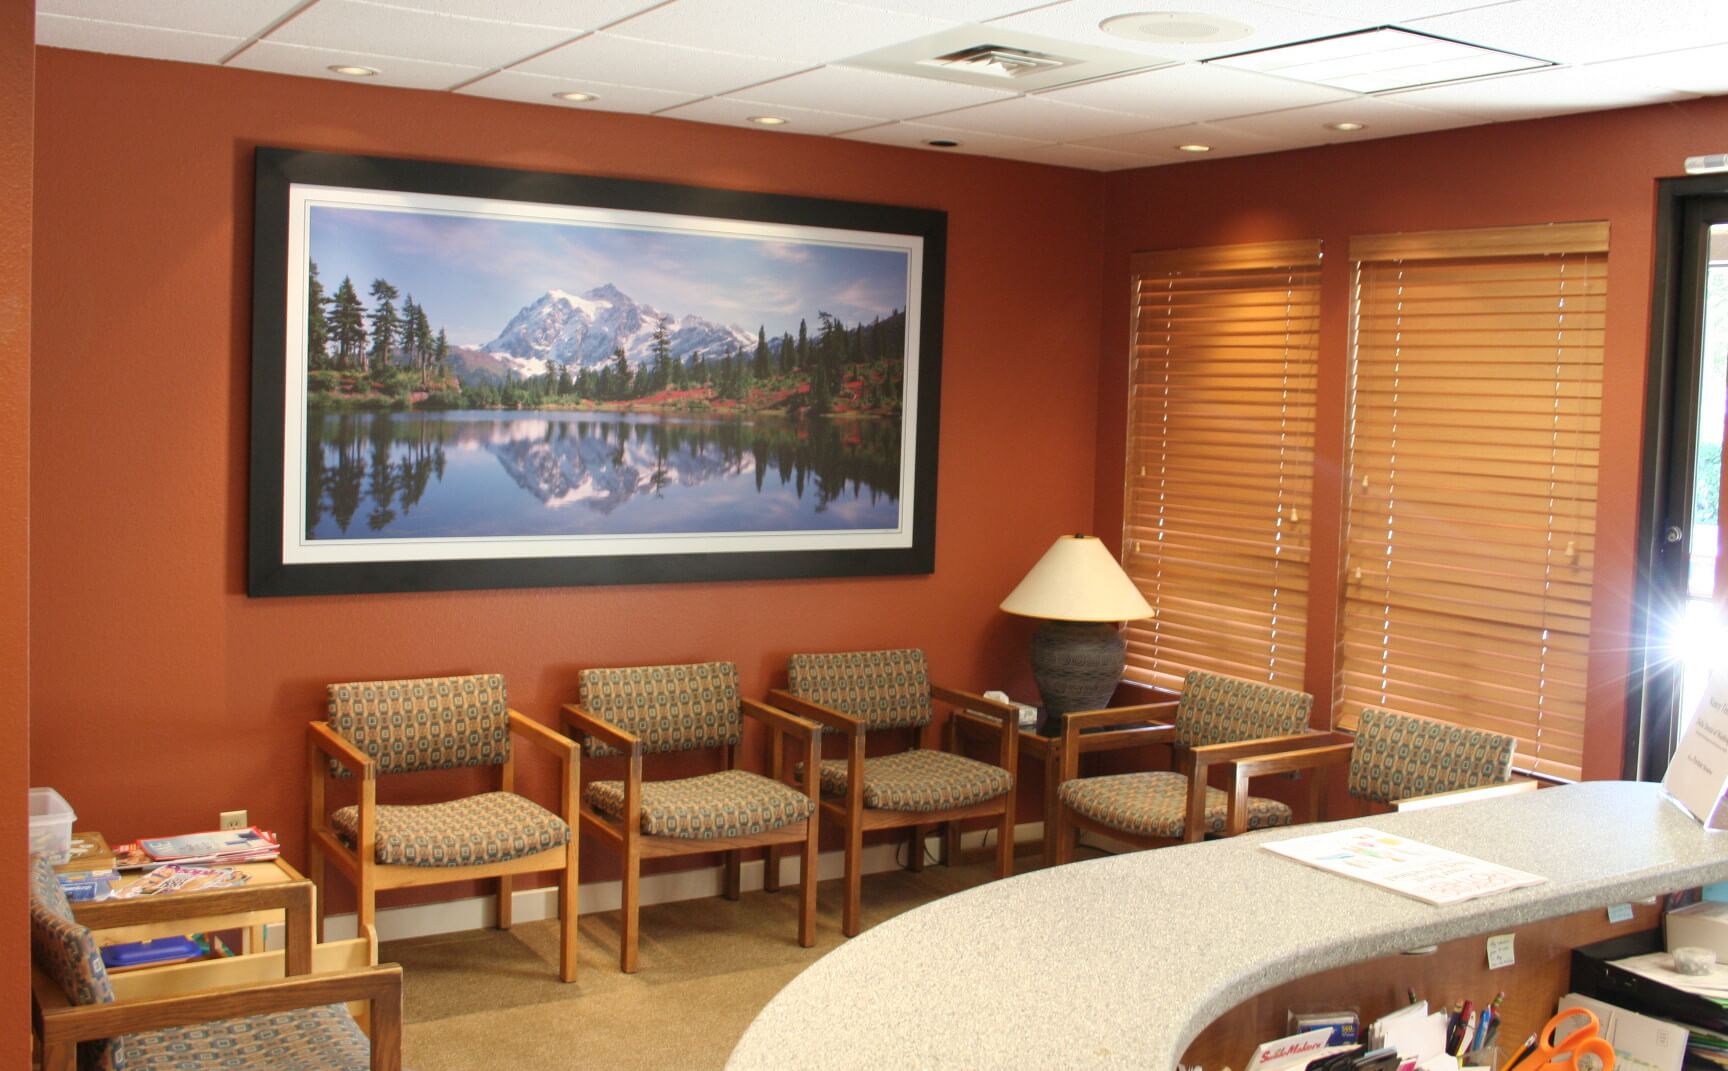 Clement and Teel Family Dentistry